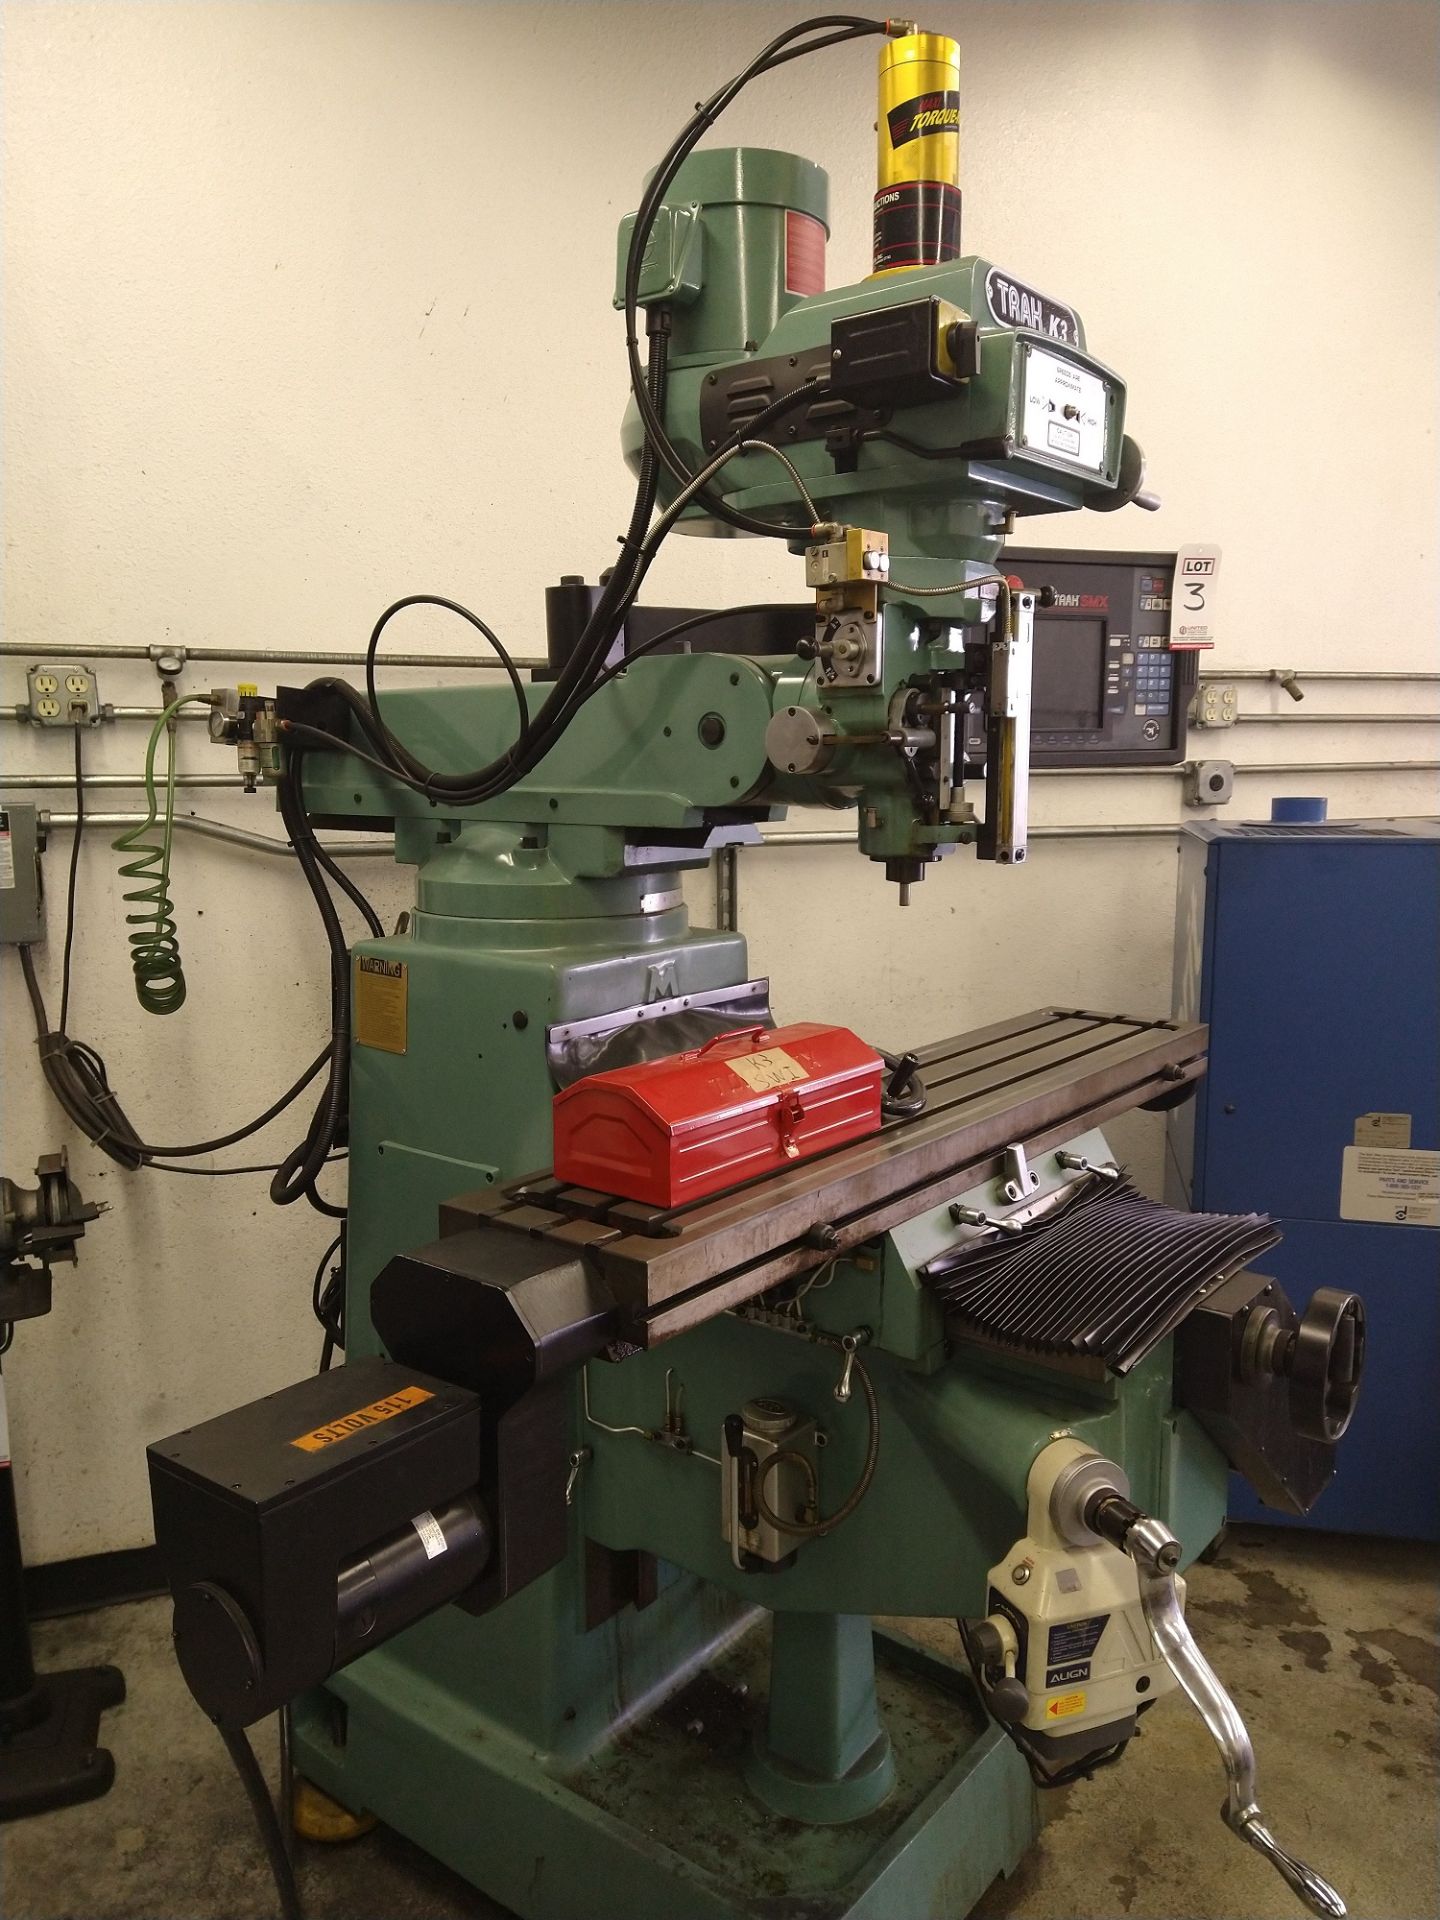 2013 TRAK K3SX CNC KNEE MILL, TRAVELS: 32" X 16" X 16", 50" X 10" TABLE, R8 SPINDLE TAPER, 4200 RPM, - Image 3 of 6